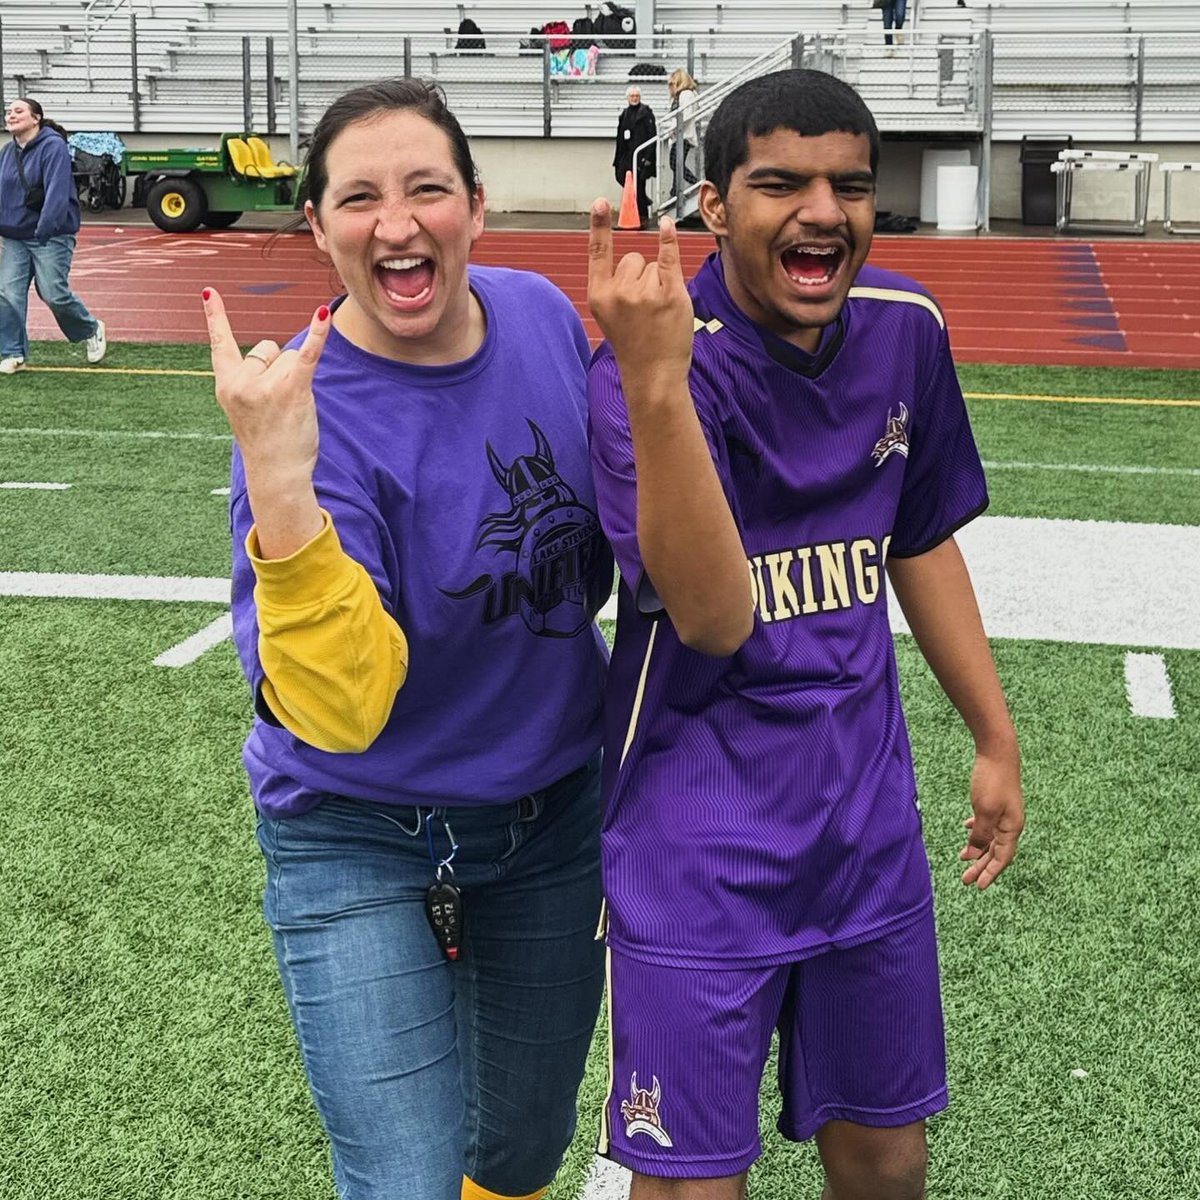 This past Thursday LSHS hosted our 2nd annual Unified Soccer Tournament! @SpecialOlympics @lssd @LSHSVikingPrin @LSHSConnect #wervikings #govikings